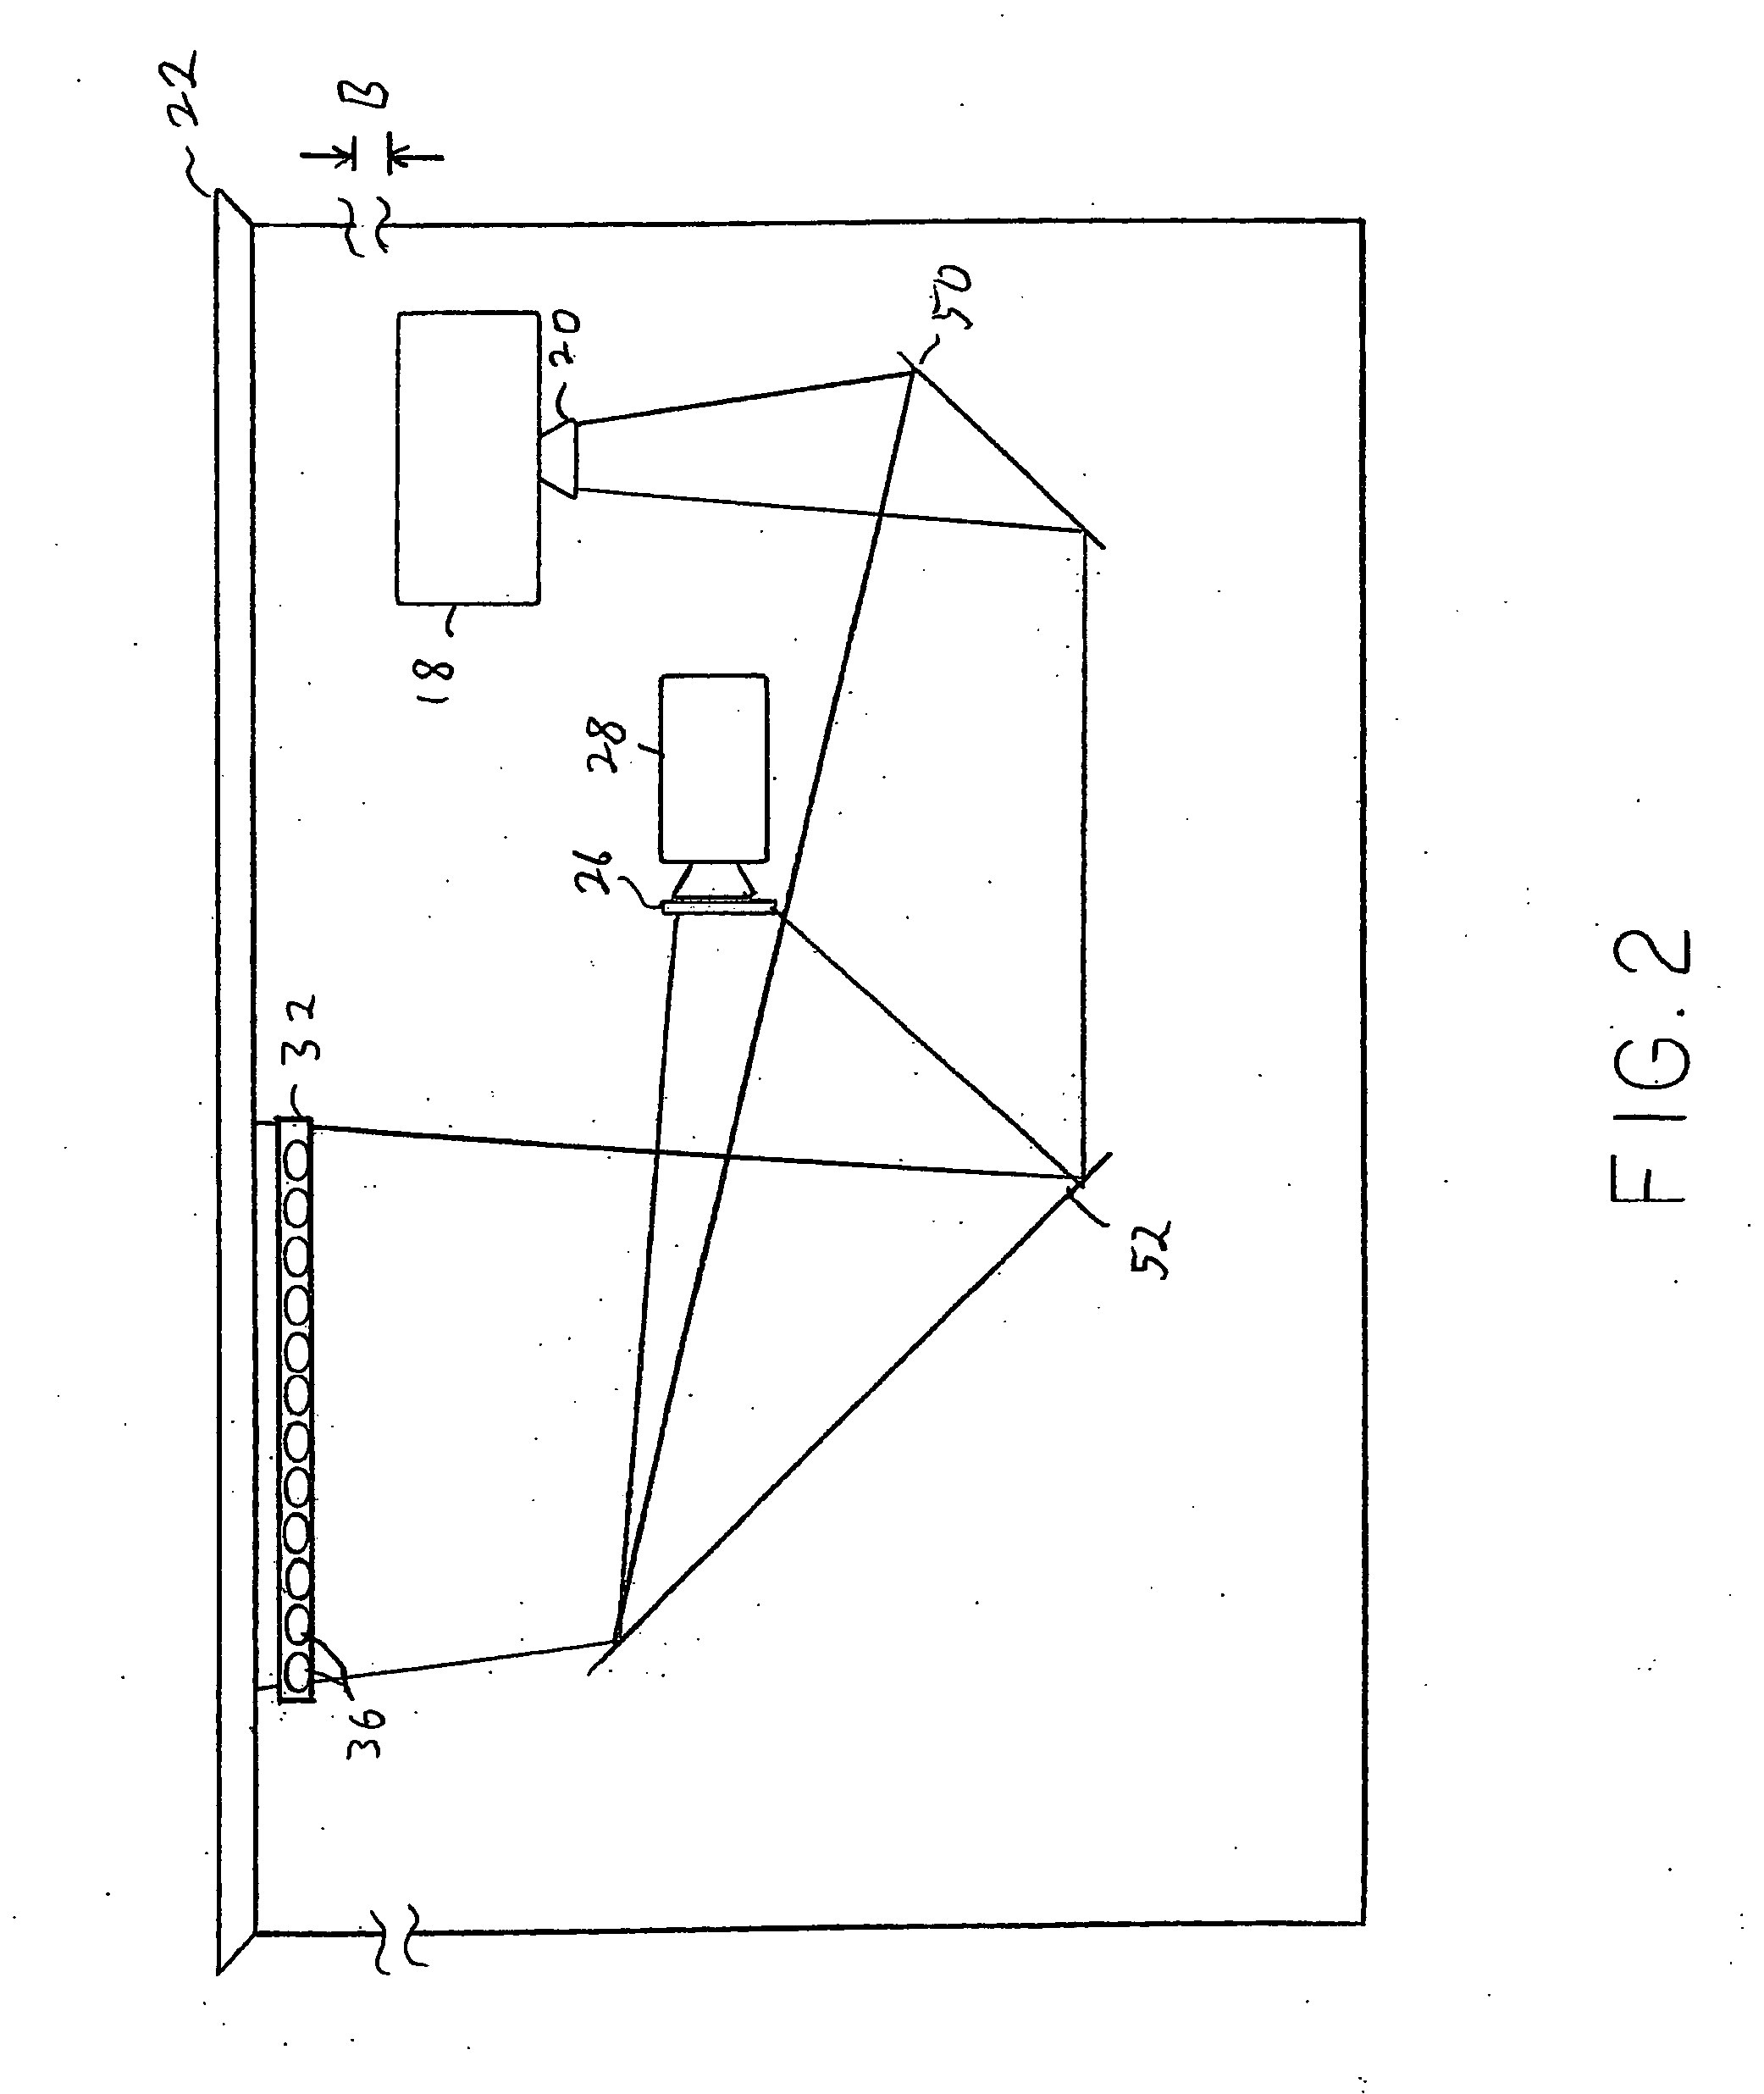 System and method for providing an interactive interface